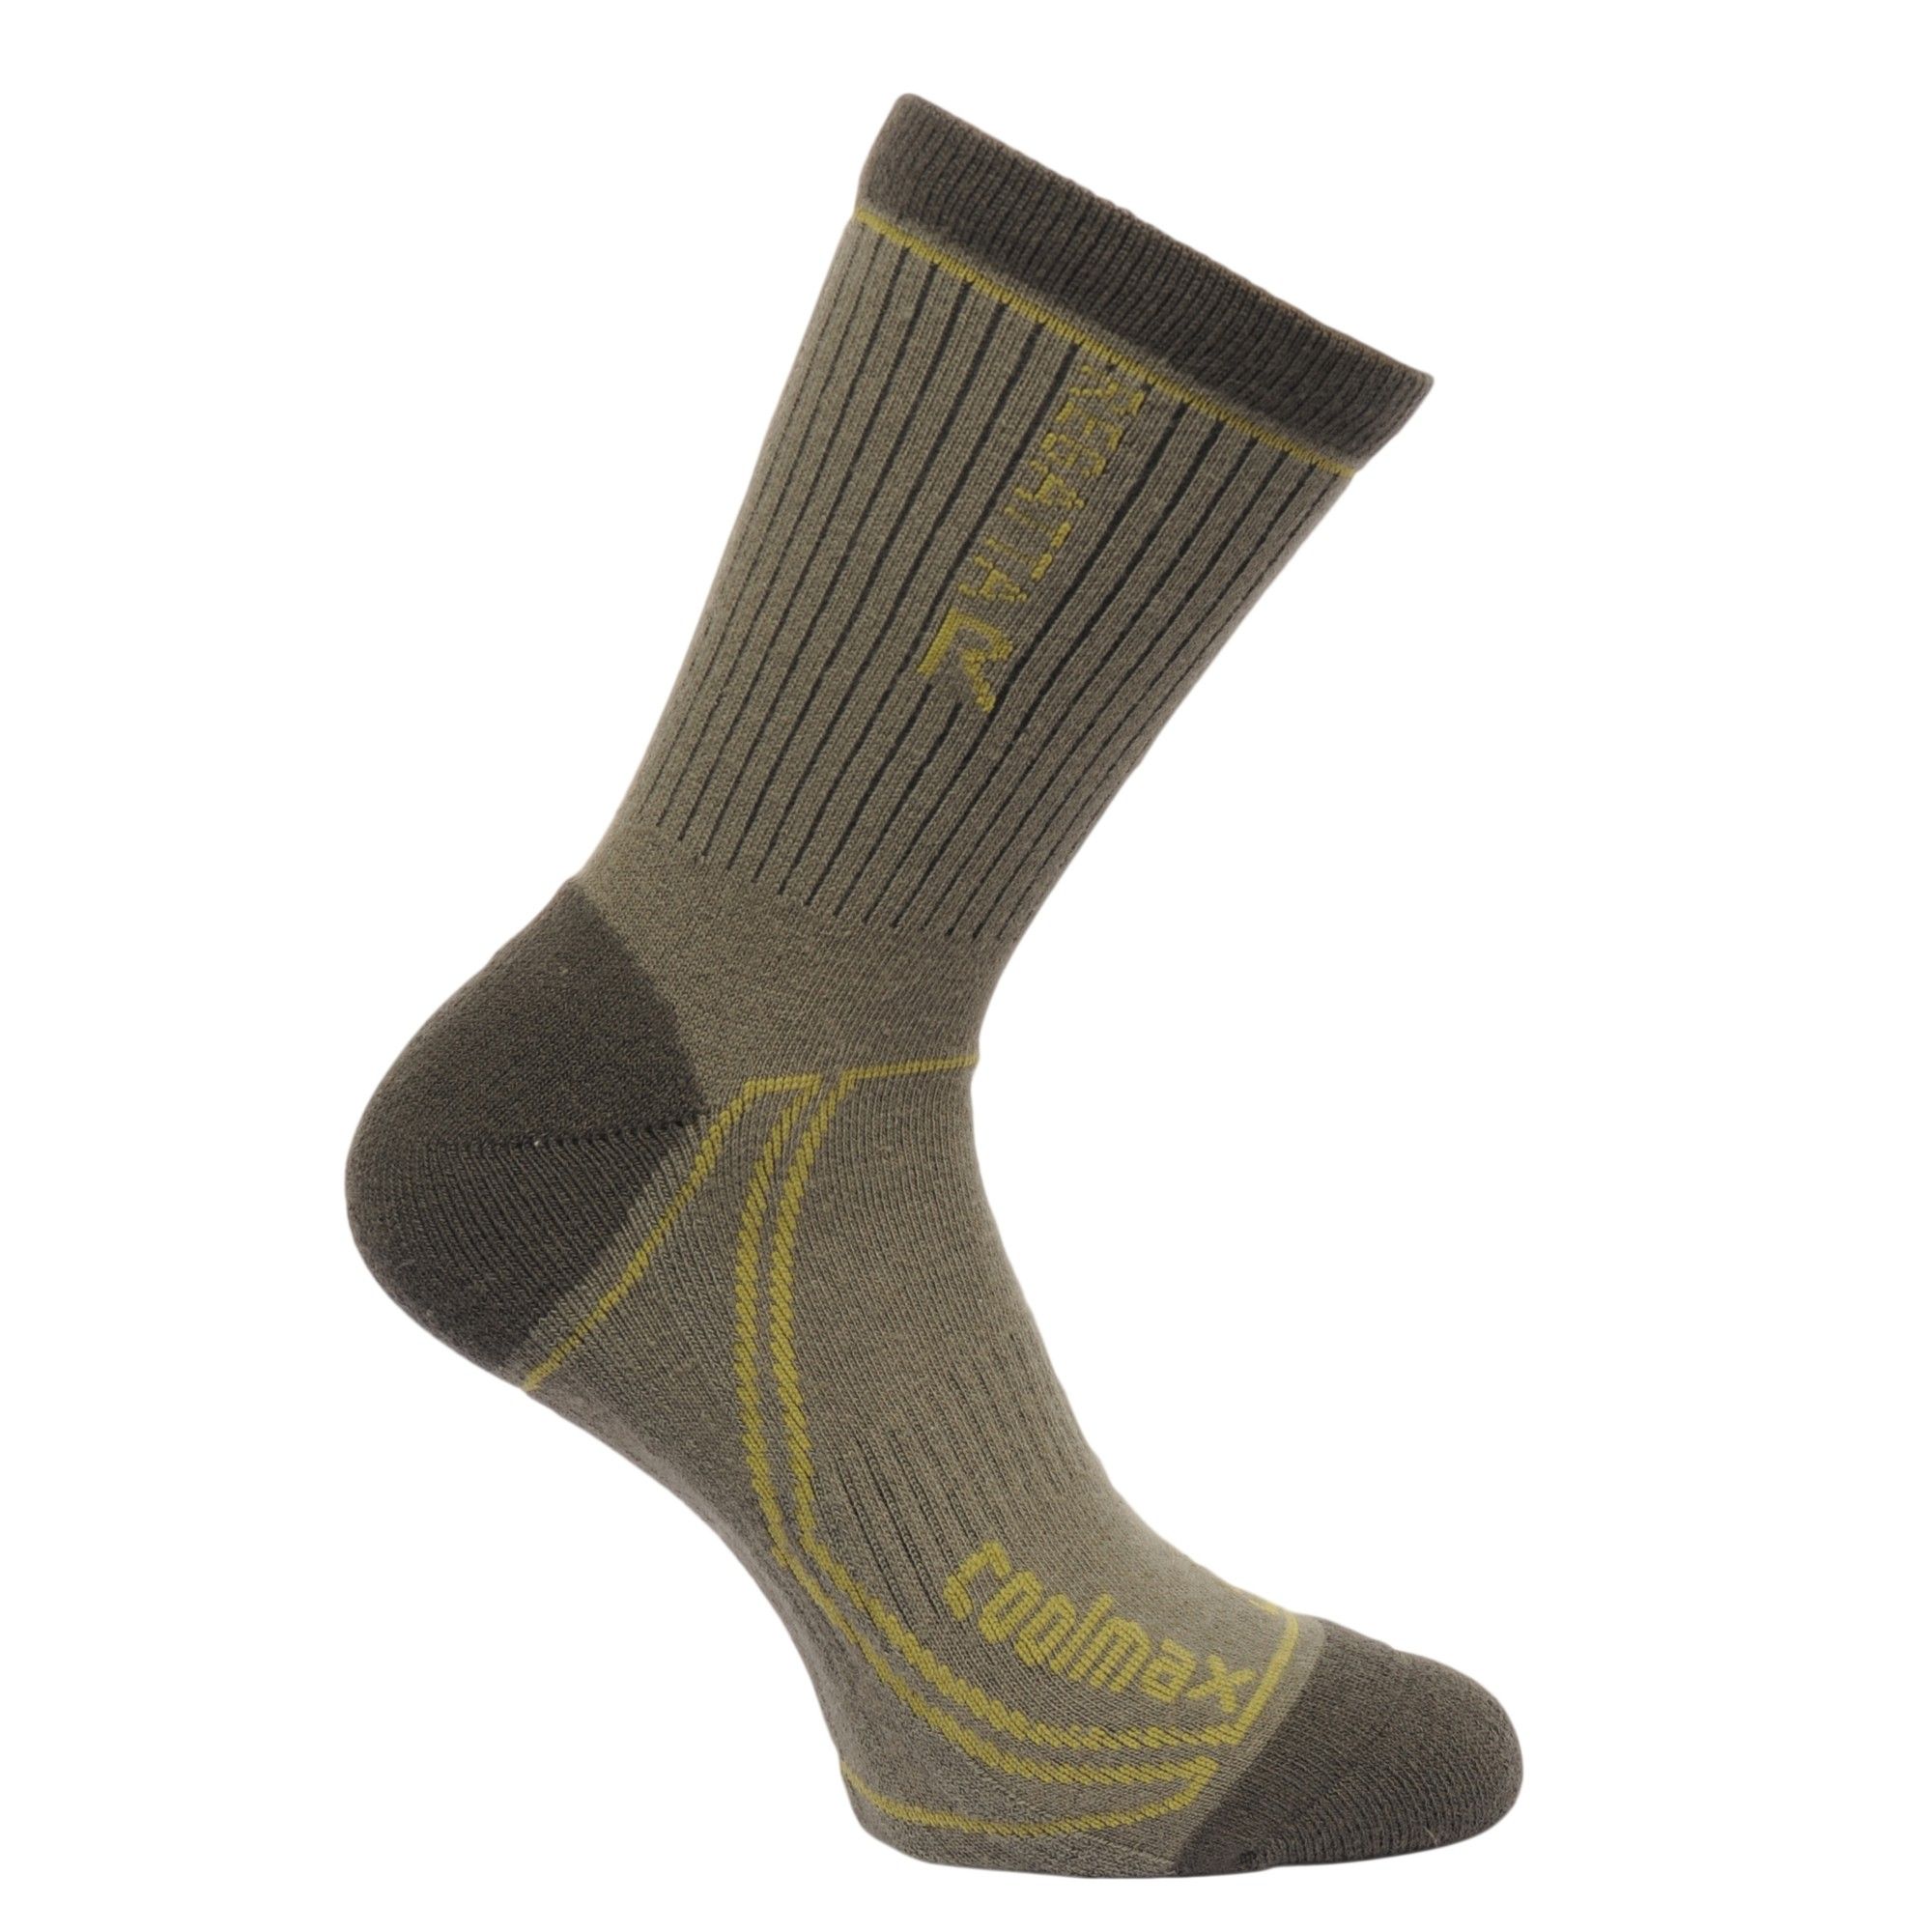 The mens Two Season Trek & Trail Sock is constructed with a high Coolmax percentage for exceptional moisture control. Strategic cushioning and reinforced areas prone to wear help keep feet happy all day long. 74% Coolmax, 23% Polyamide,  3% Elastane.